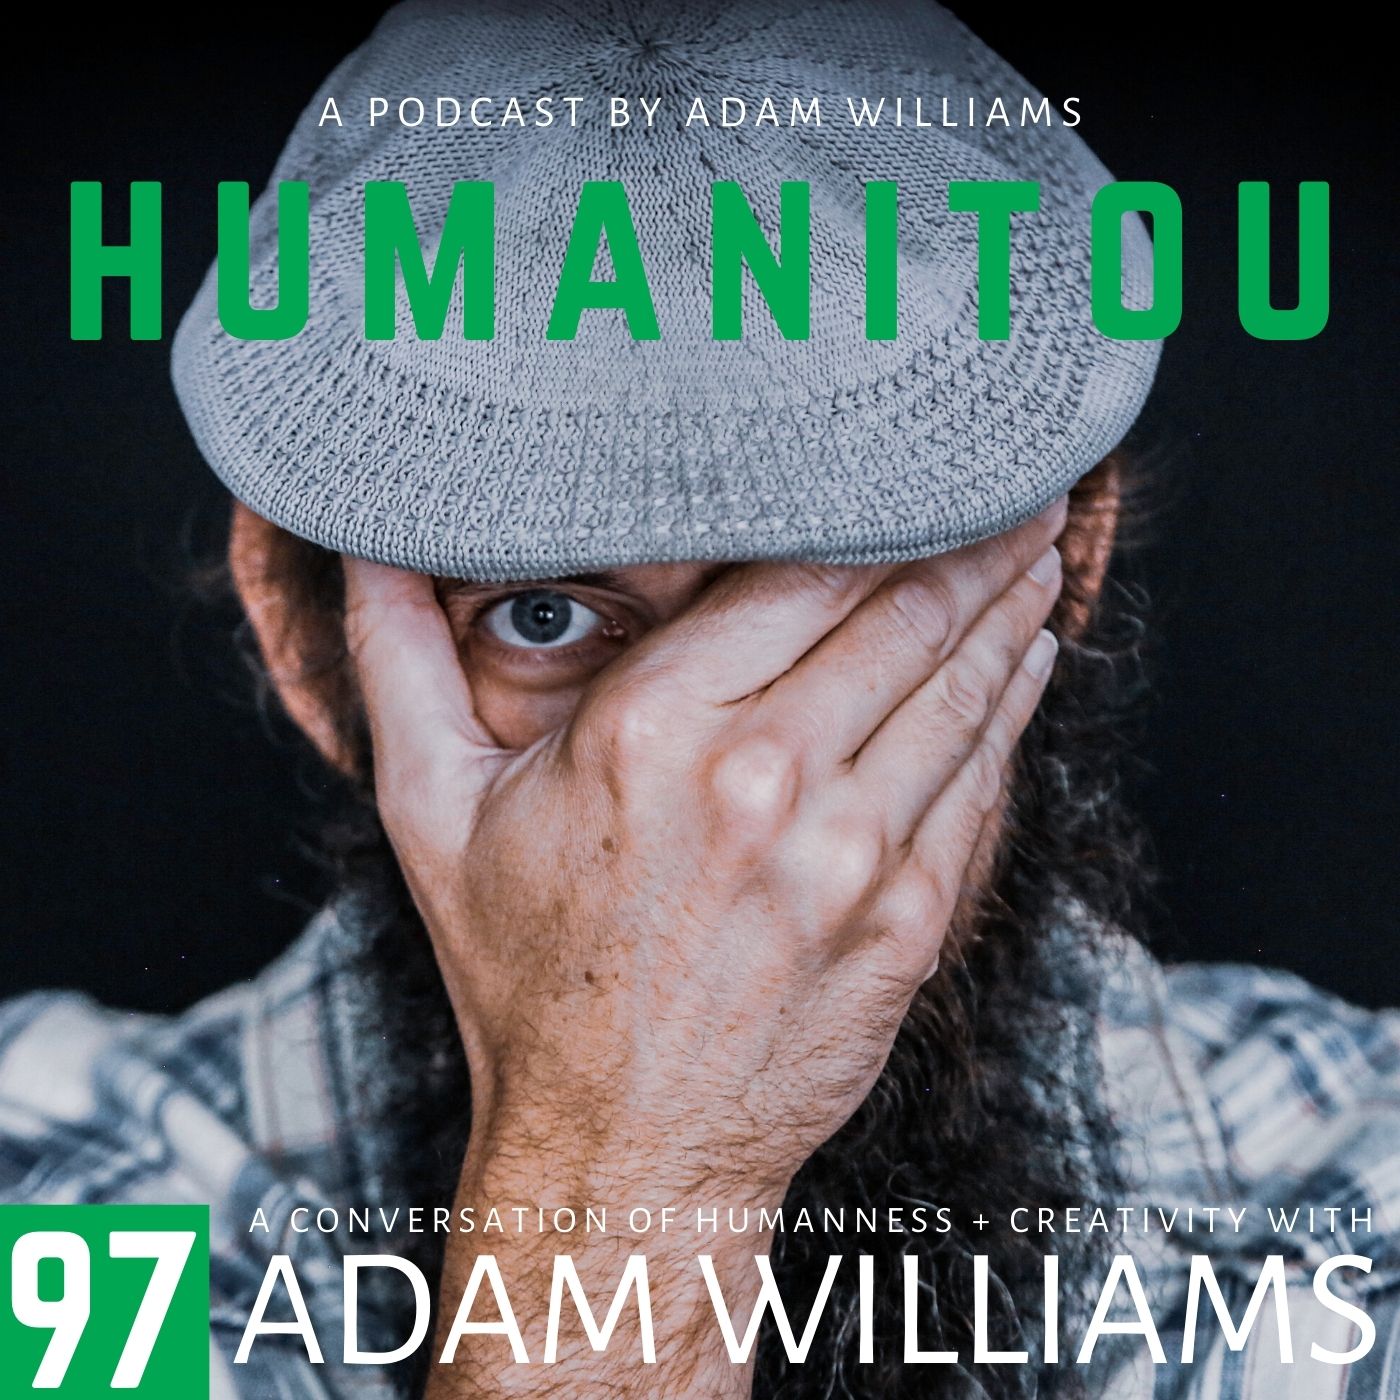 97: Adam Williams, on humanness and creativity, and what Humanitou really is about